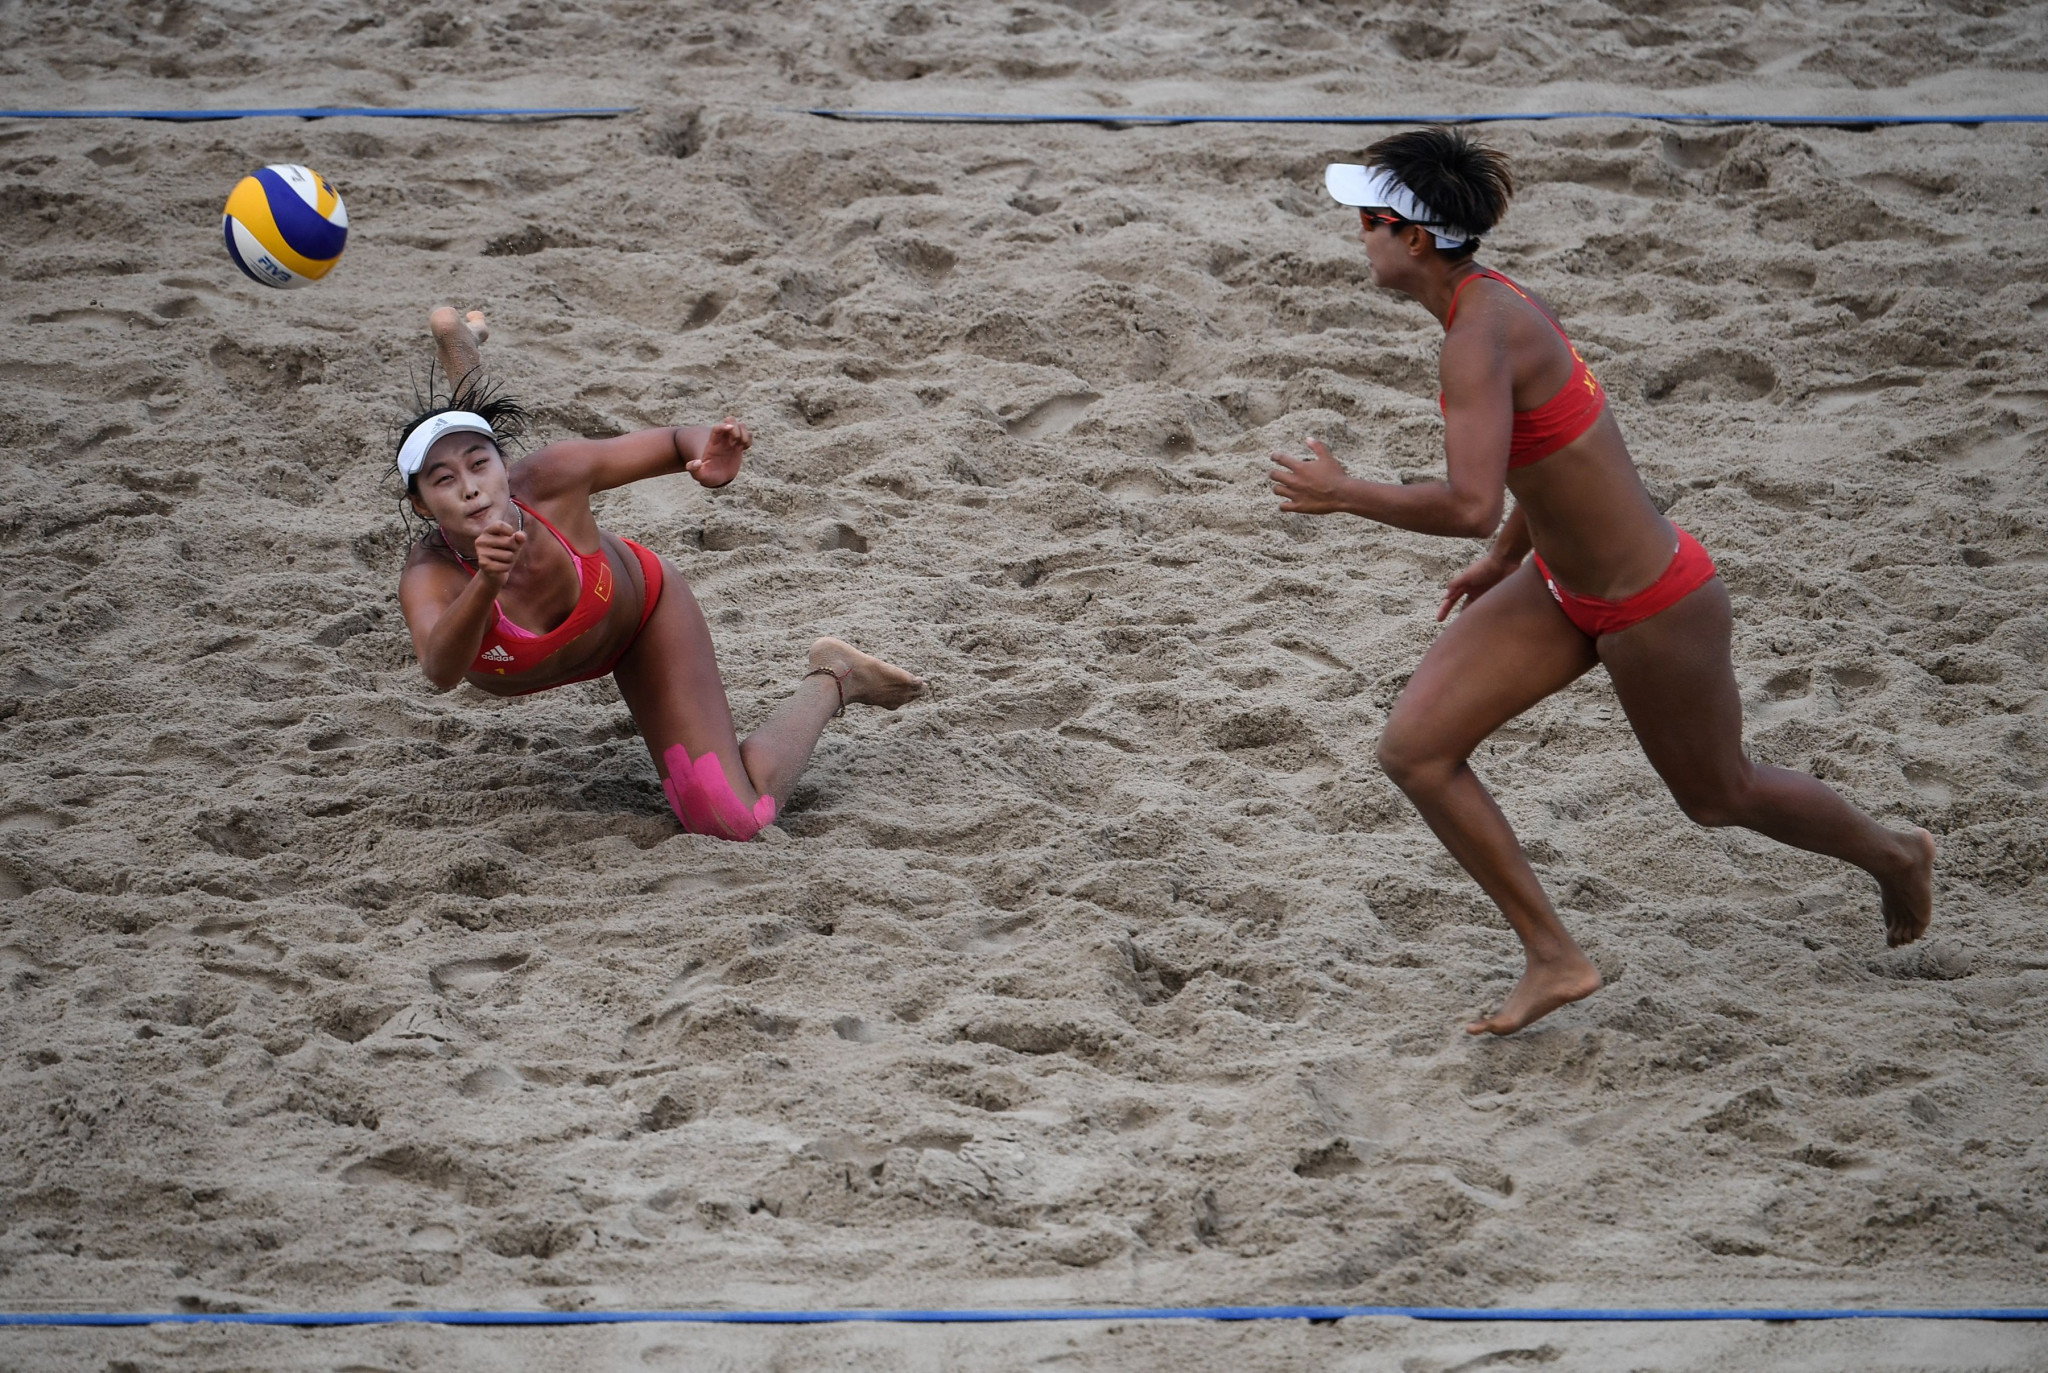 China's Fan Wang and Xinyi Xia won gold in the women's beach volleyball, beating Miki Ishii and Megumi Murakami from Japan ©Getty Images